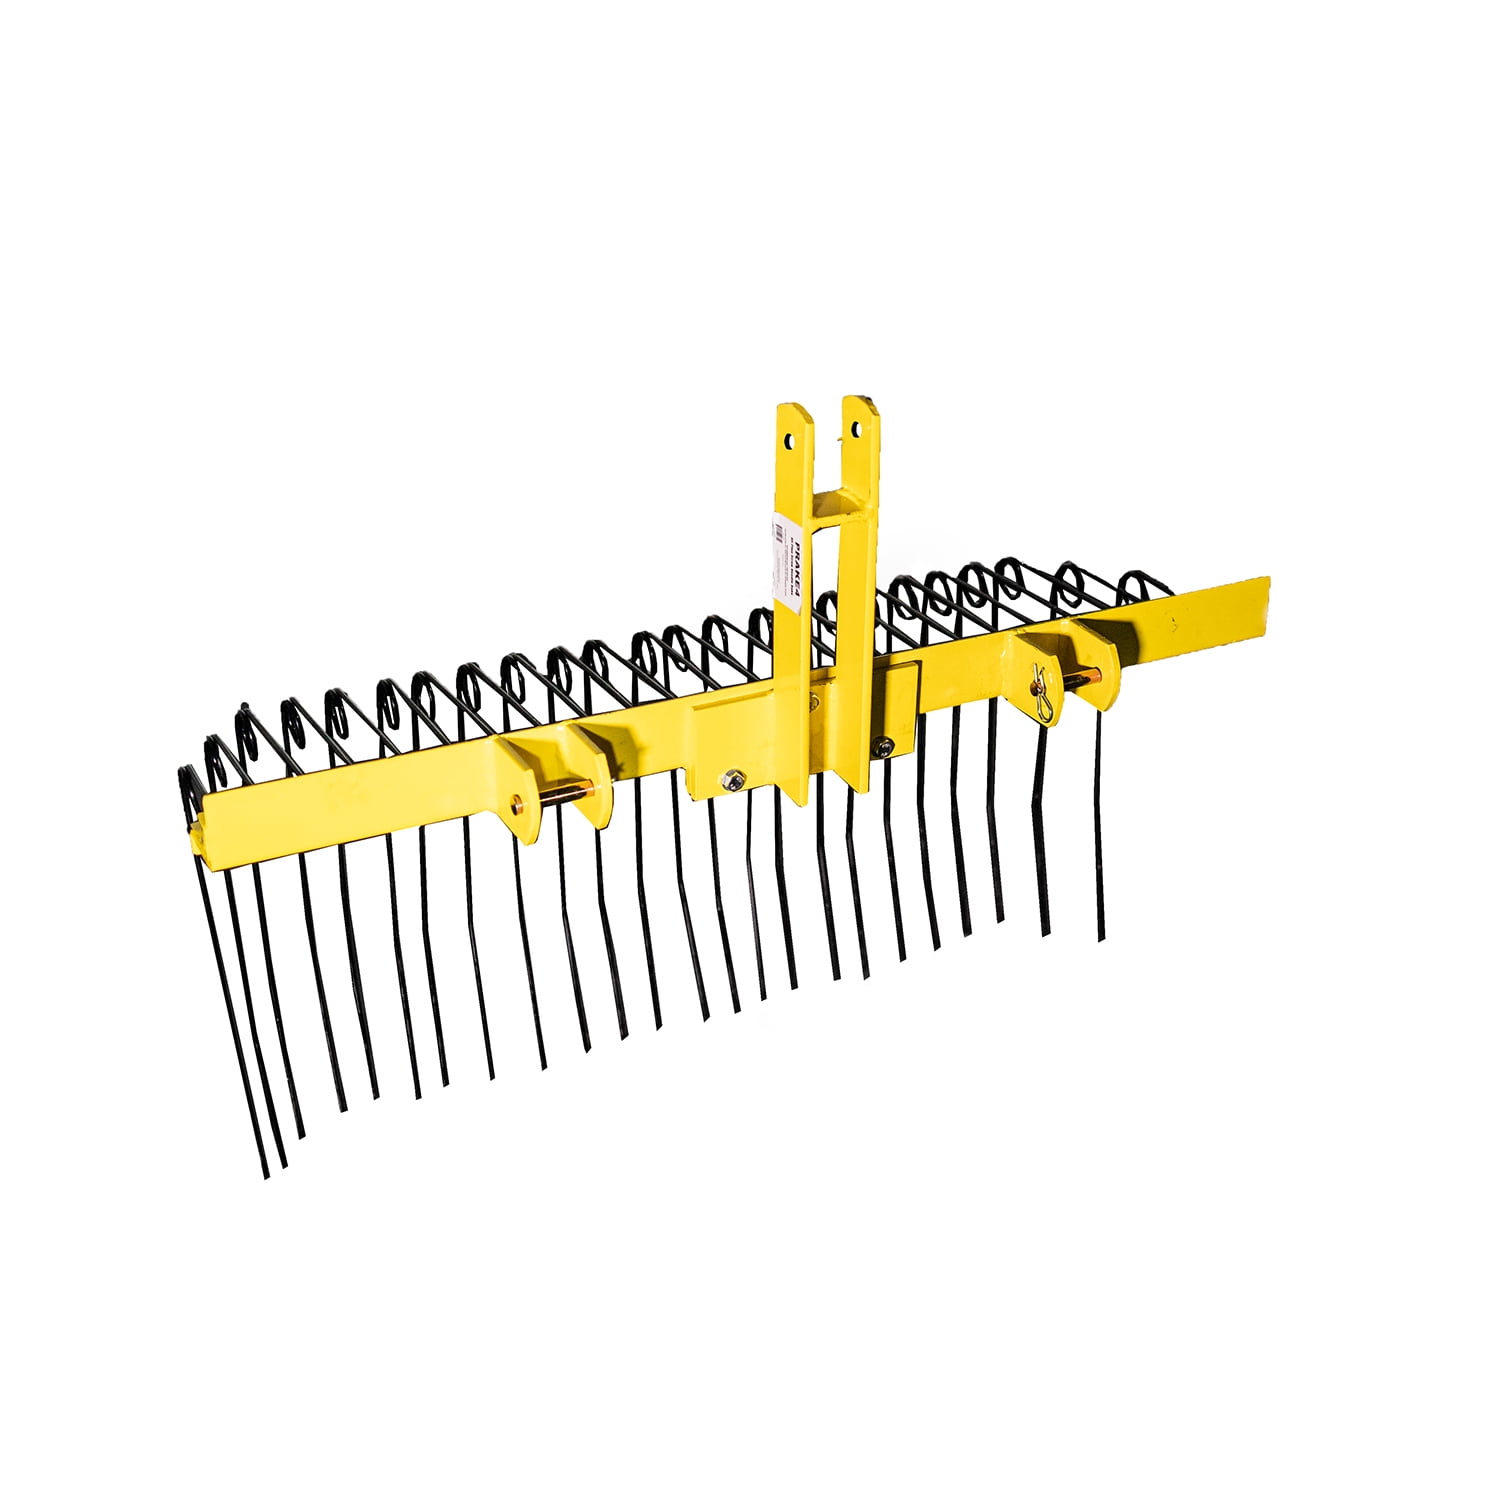 Titan Attachments Pine Straw Needle Rake 4 ft for Cat 0, 3 Point ...